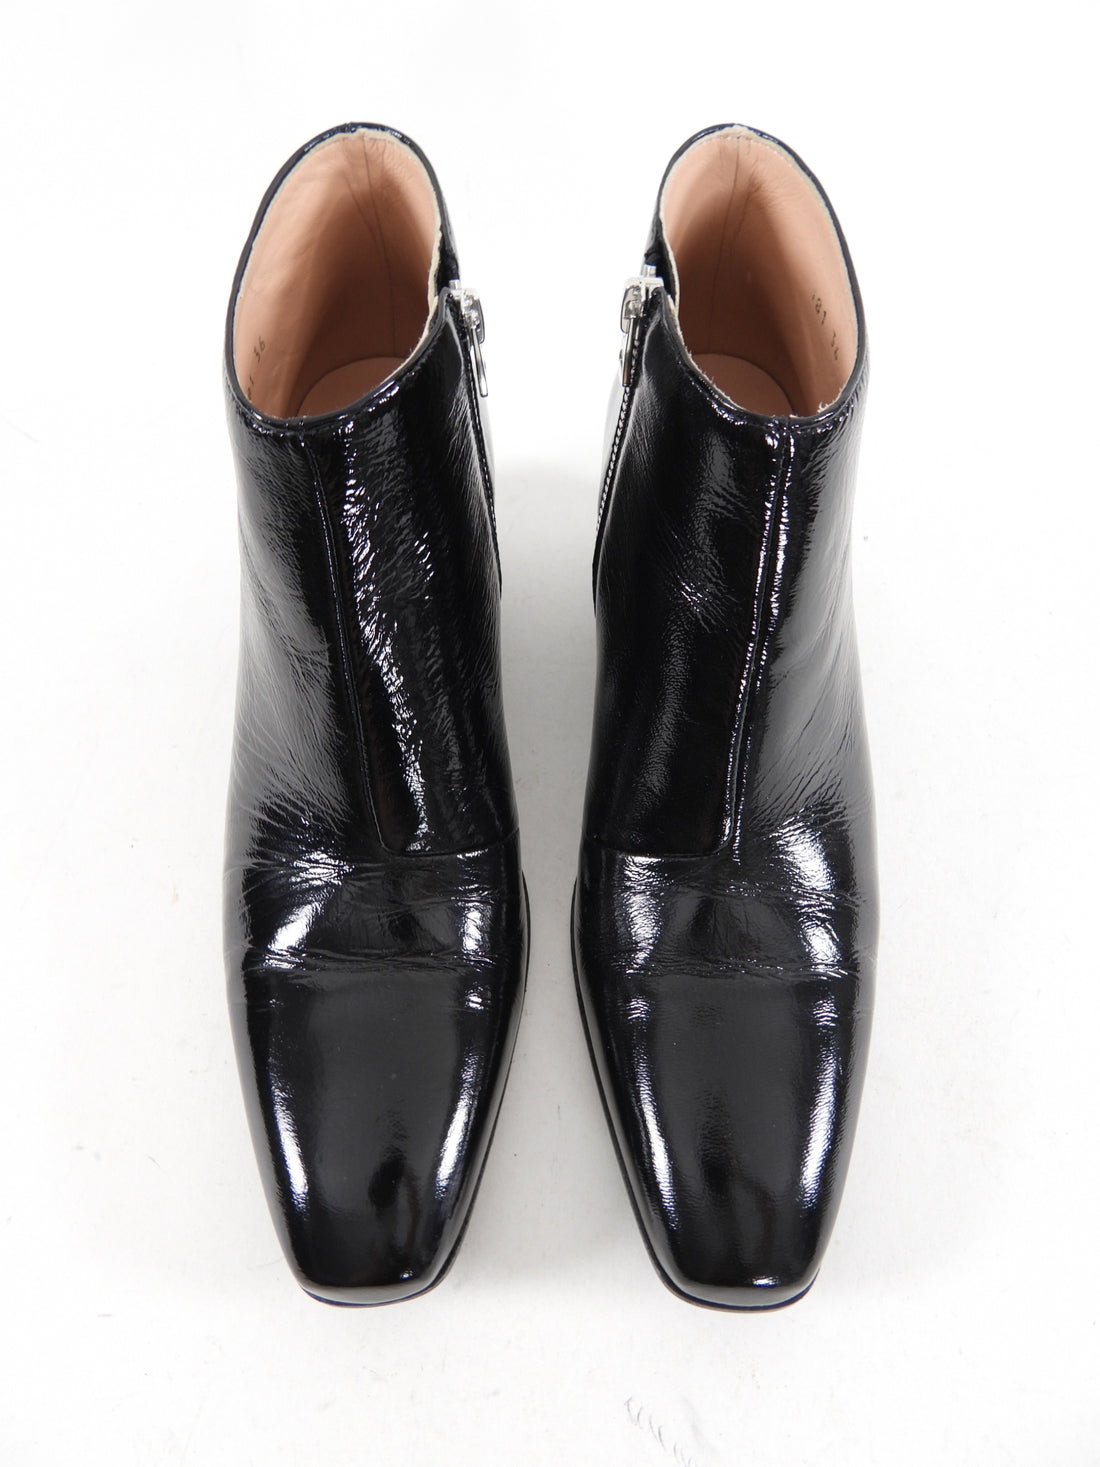 Acne Studios Black Patent Leather Ankle Boots - 37